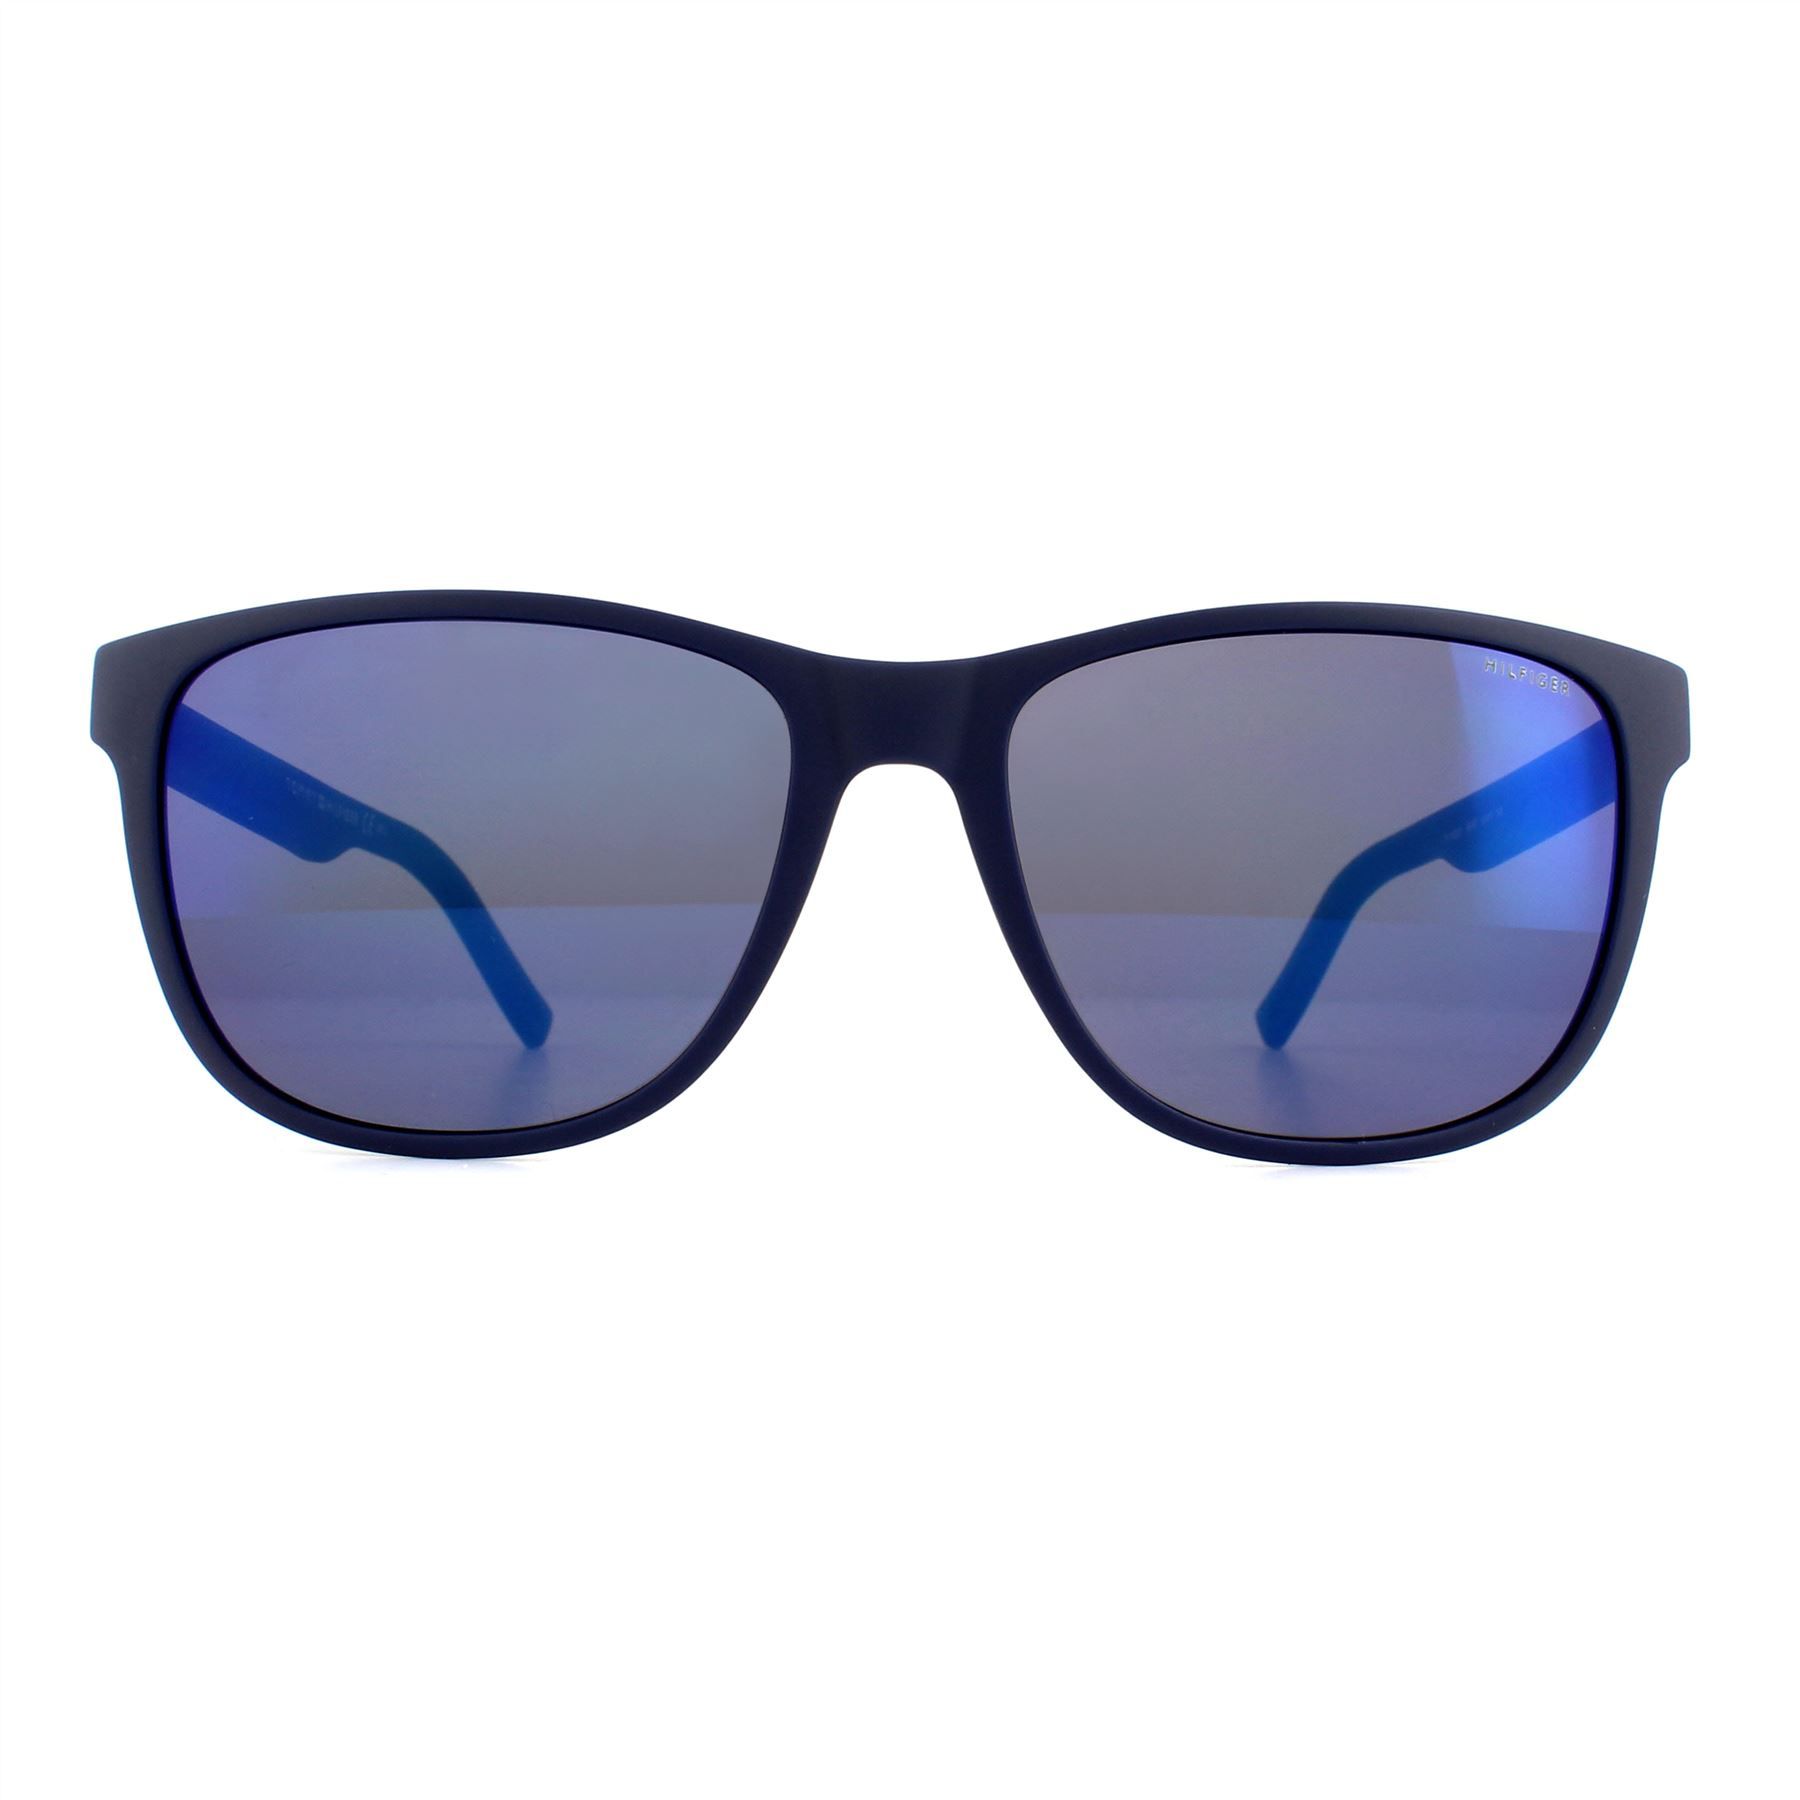 Tommy Hilfiger Sunglasses TH 1403/S R6I XT Navy Blue Blue Mirror are a bright colourful frame featuring a small Tommy Hilfiger icon at the temples on this simple but effective style.